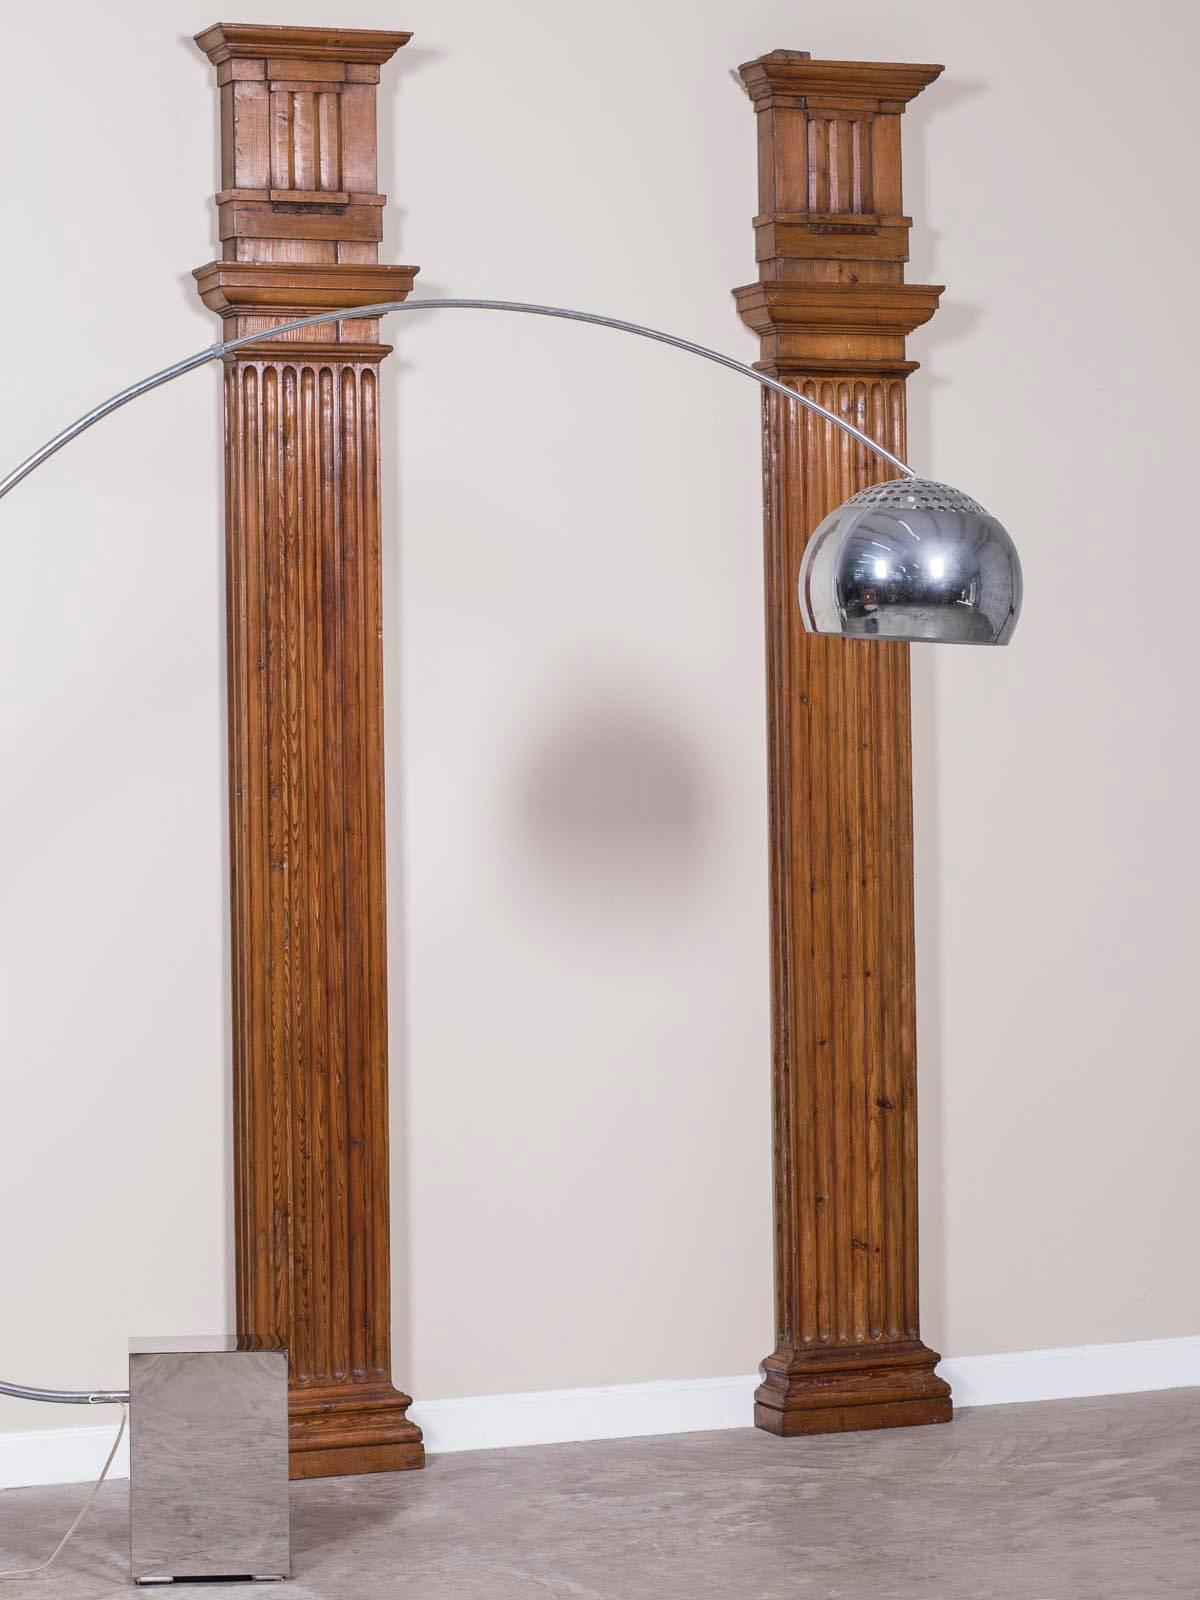 Pair of antique French Louis XVI period architectural pine pilasters from France, circa 1790 originally part of the Boiserie in the library of a chateau in the west of France. The exceptional scale of these antique French pilasters is impressive as